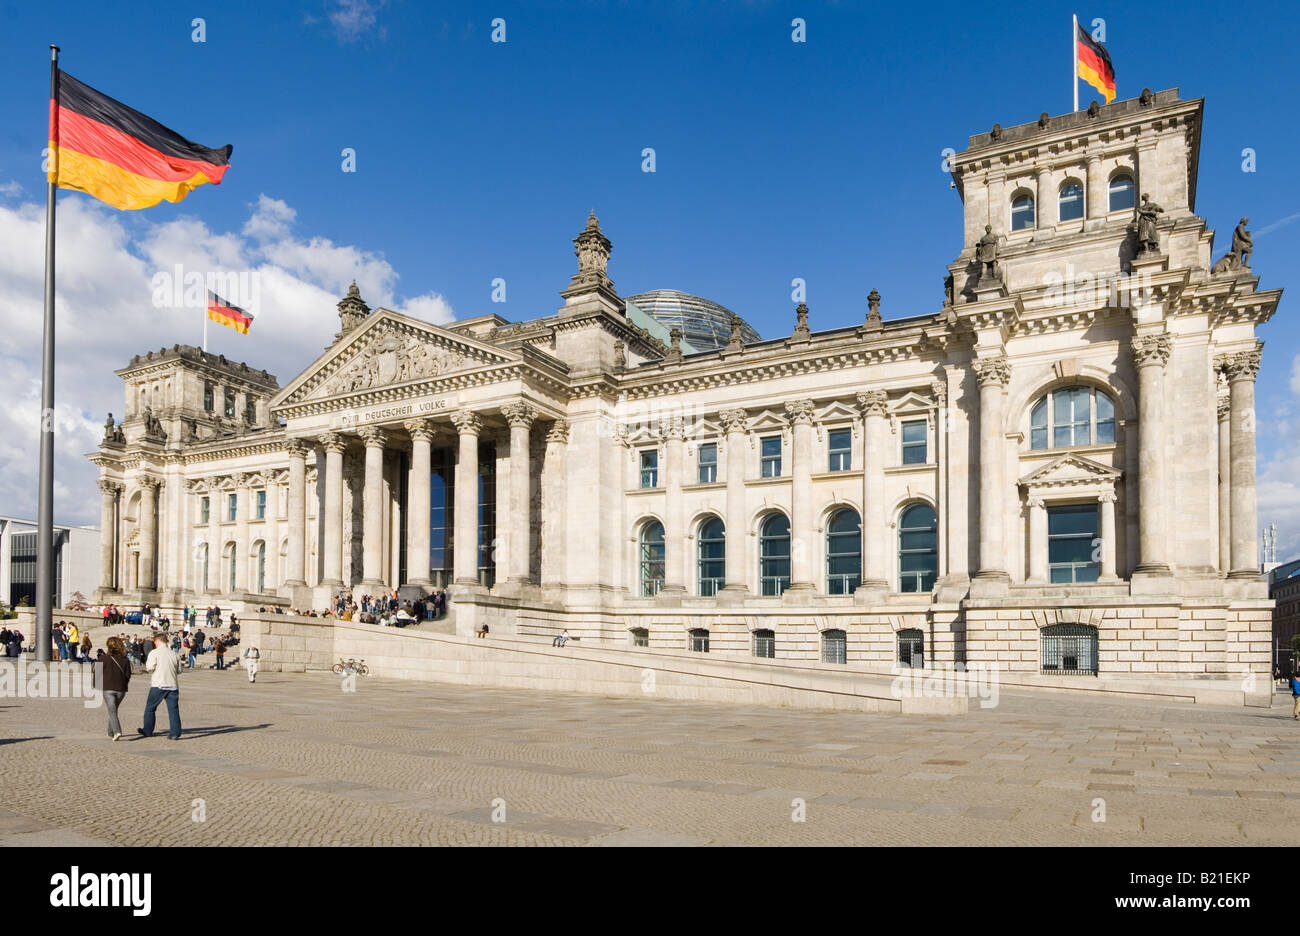 A 3 picture stitch panoramic view of the Reichstag (German Parliment Building) and tourists on a sunny day. Stock Photo